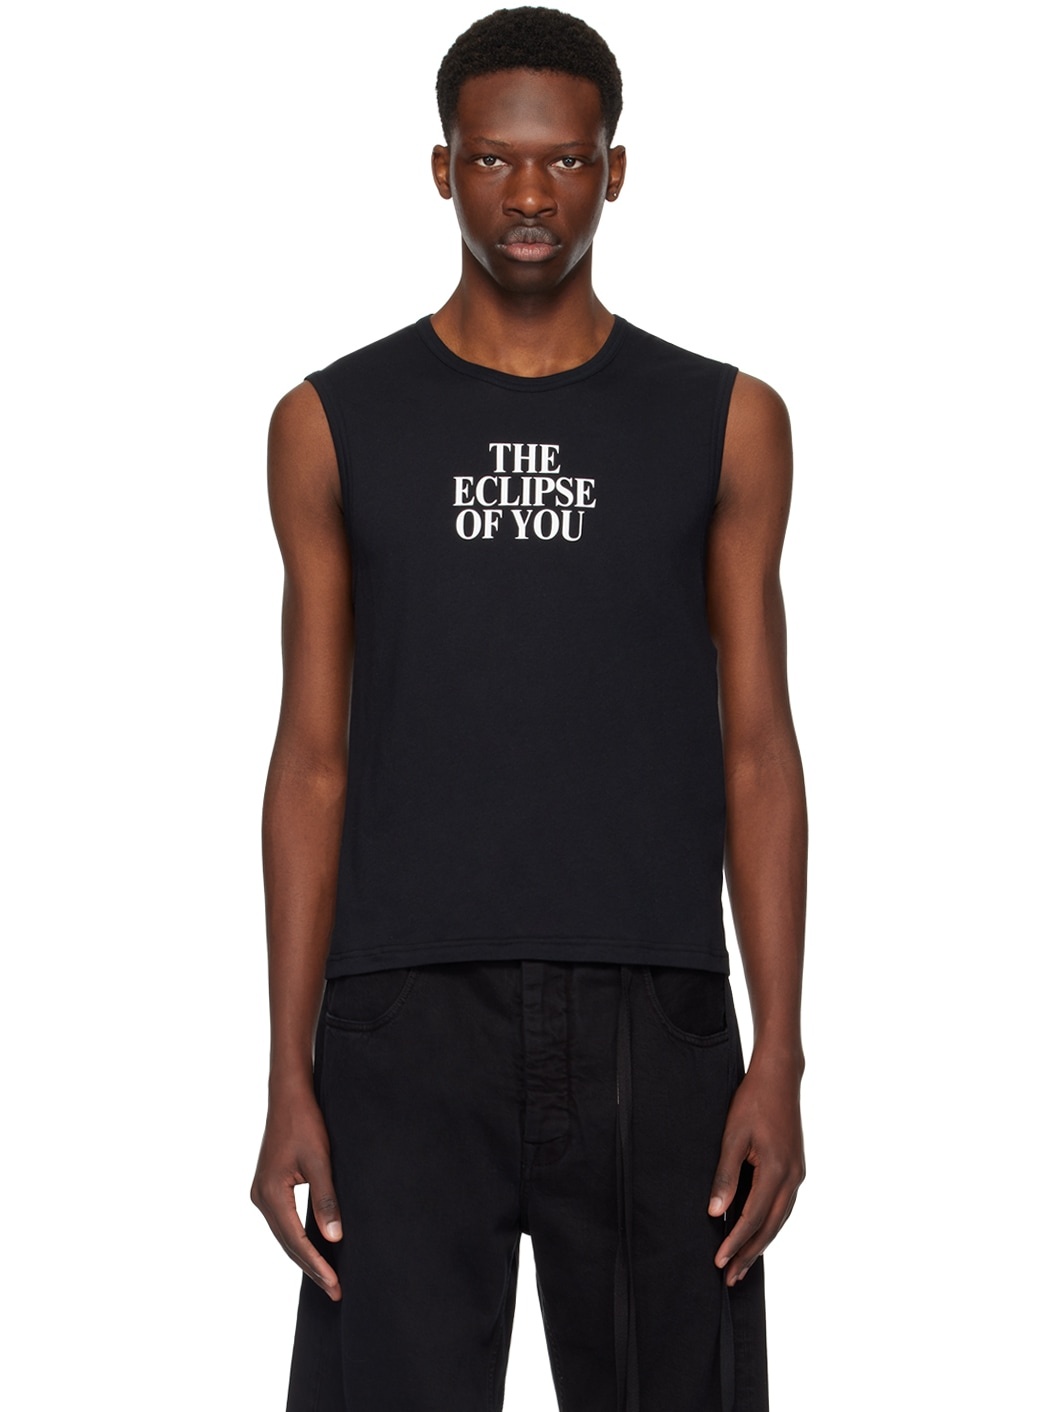 Black 'Eclipse Of You' Tank Top - 1